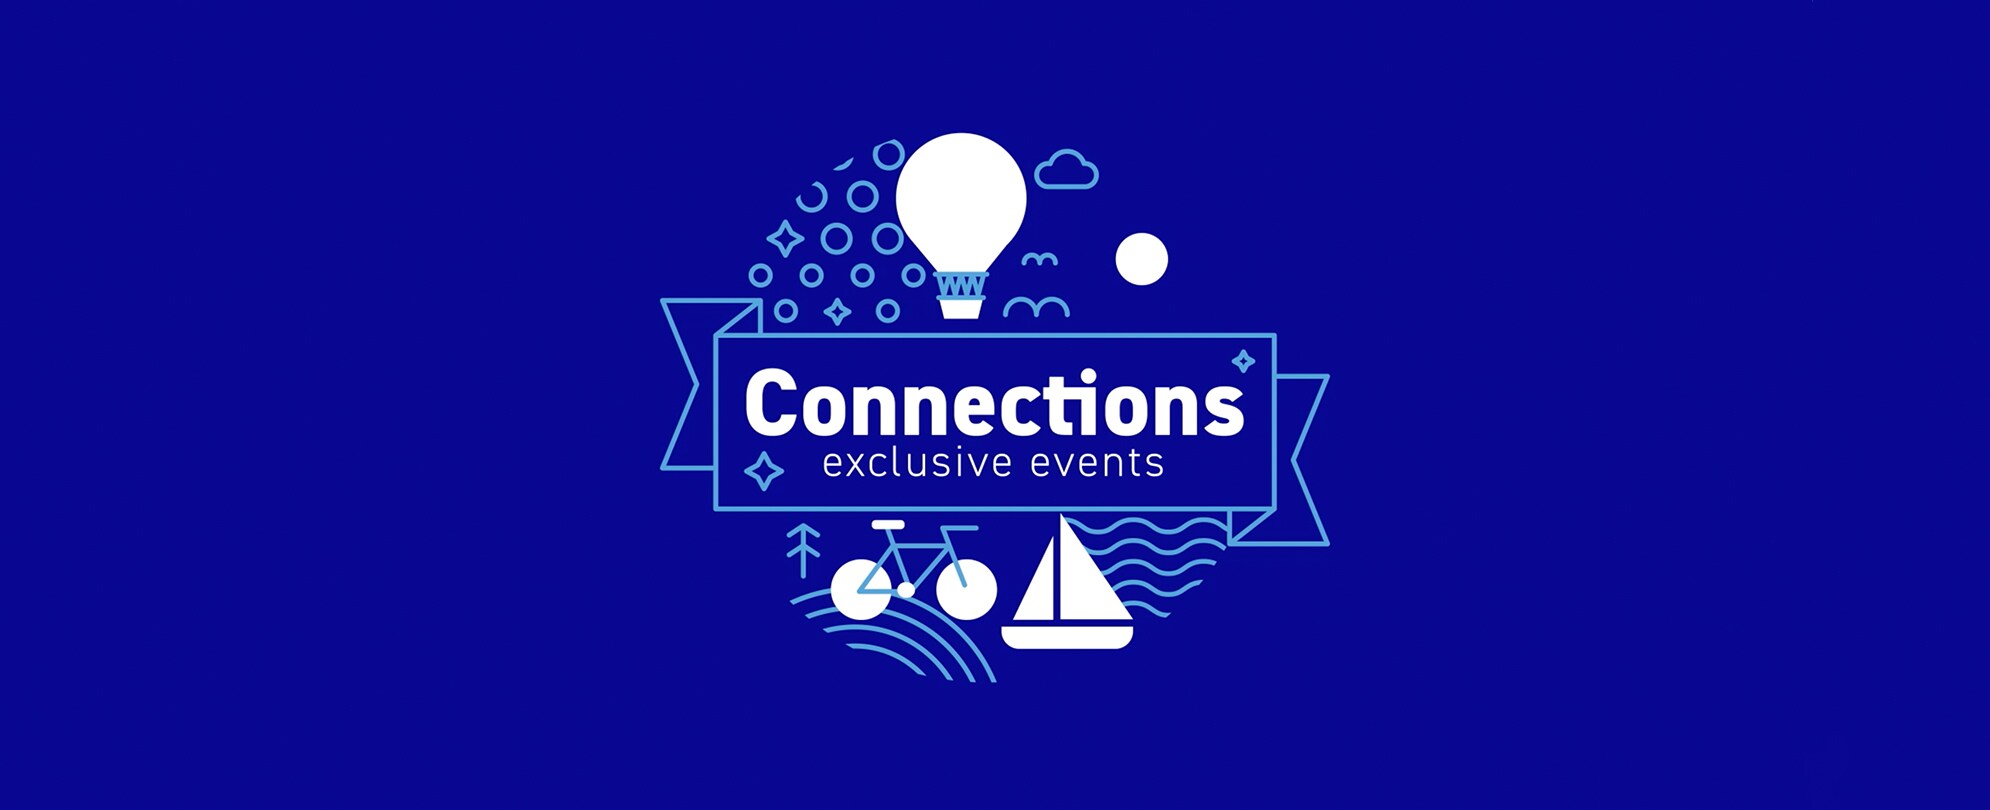 A recap video of the Austin Connections Exclusive Event with hot air balloon, bicycle, and sailboat icons.